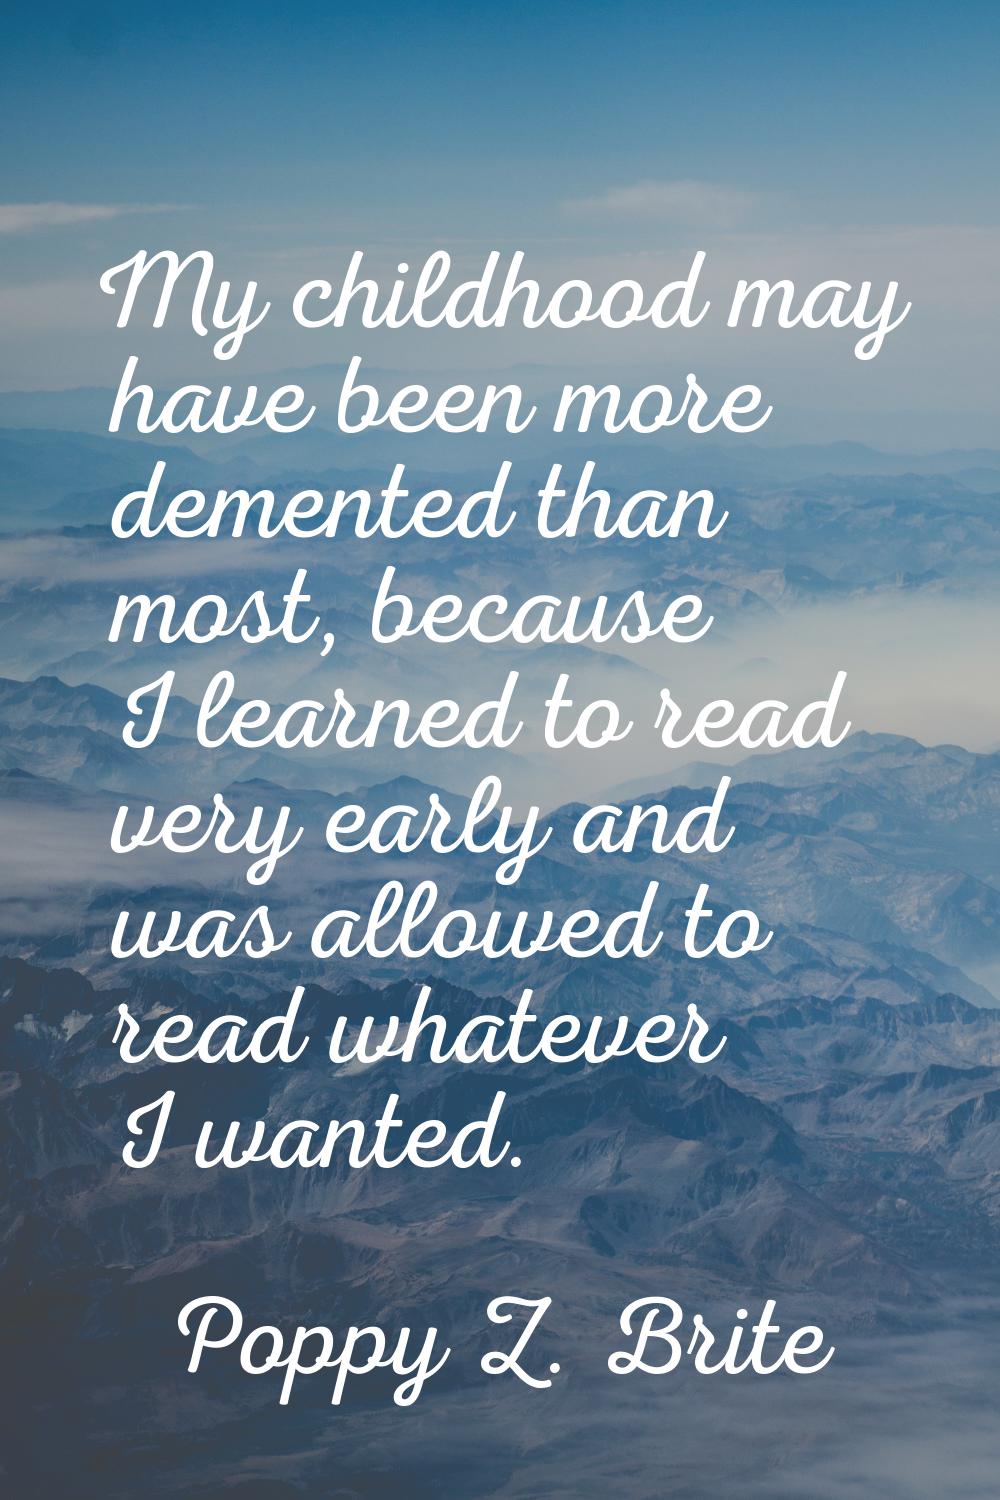 My childhood may have been more demented than most, because I learned to read very early and was al